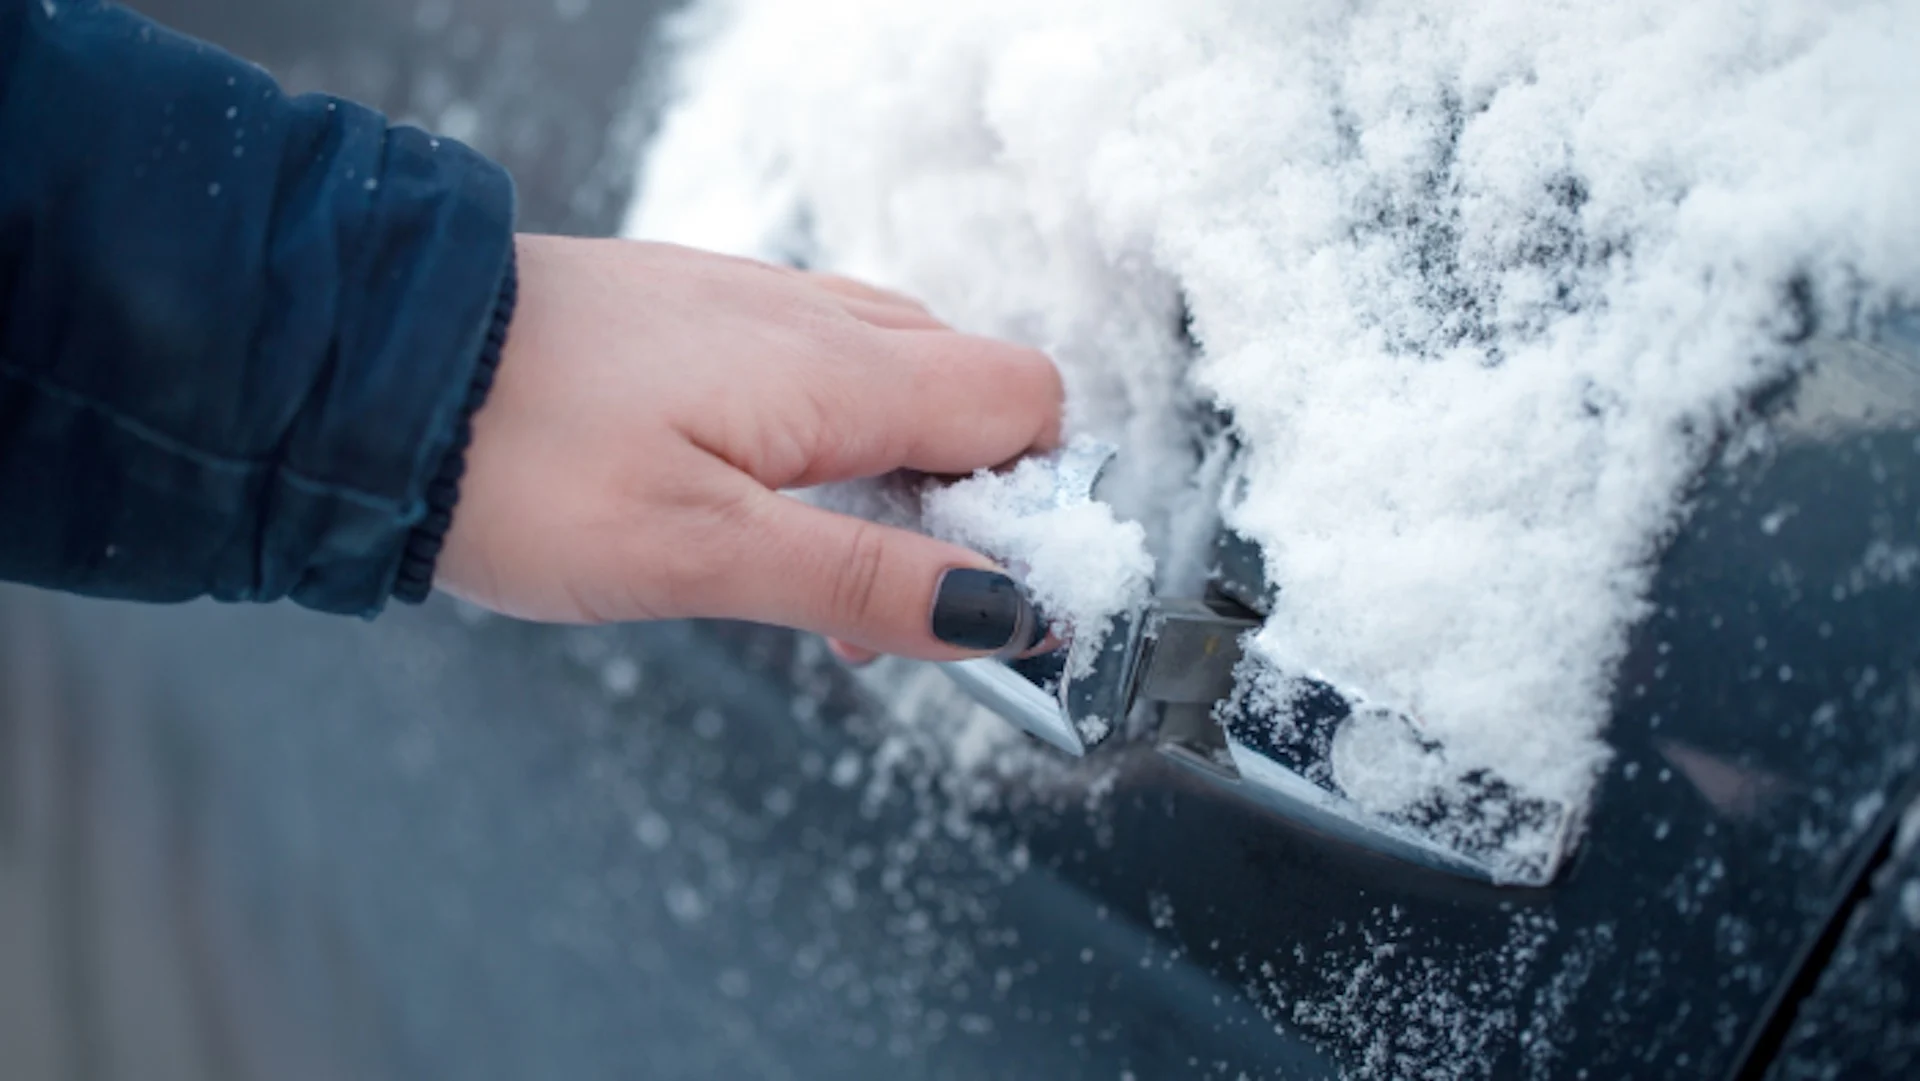 Here's another hack for those icy windshields